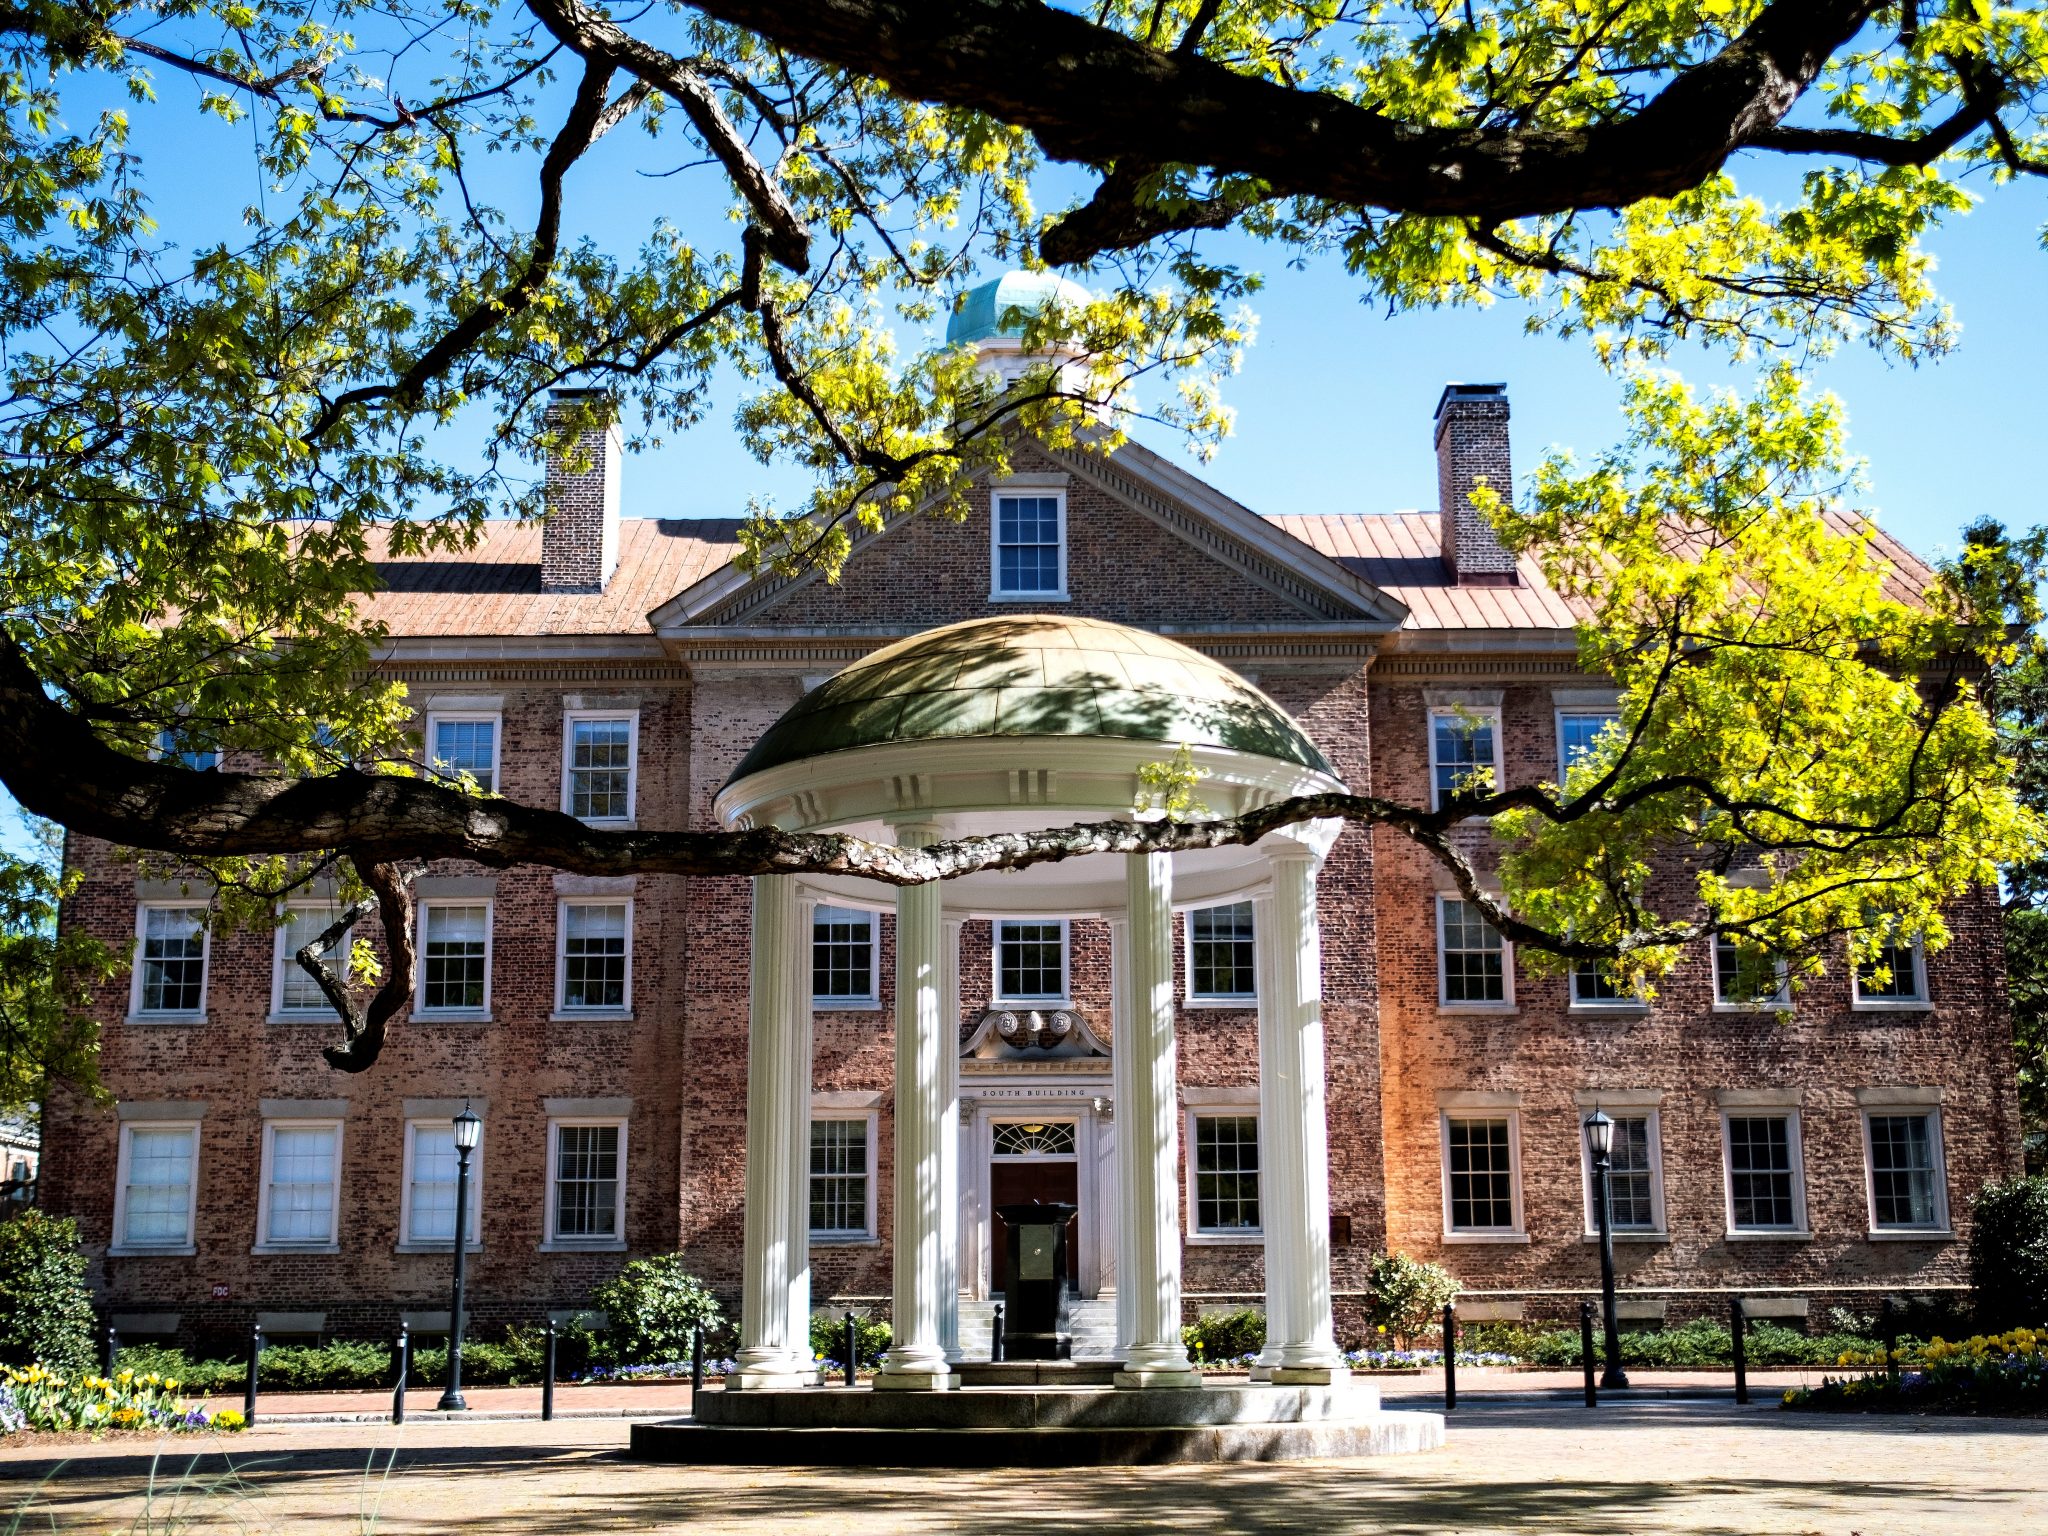 unc-chapel-hill-announces-new-partnership-with-american-academy-of-diplomacy-unc-global-affairs